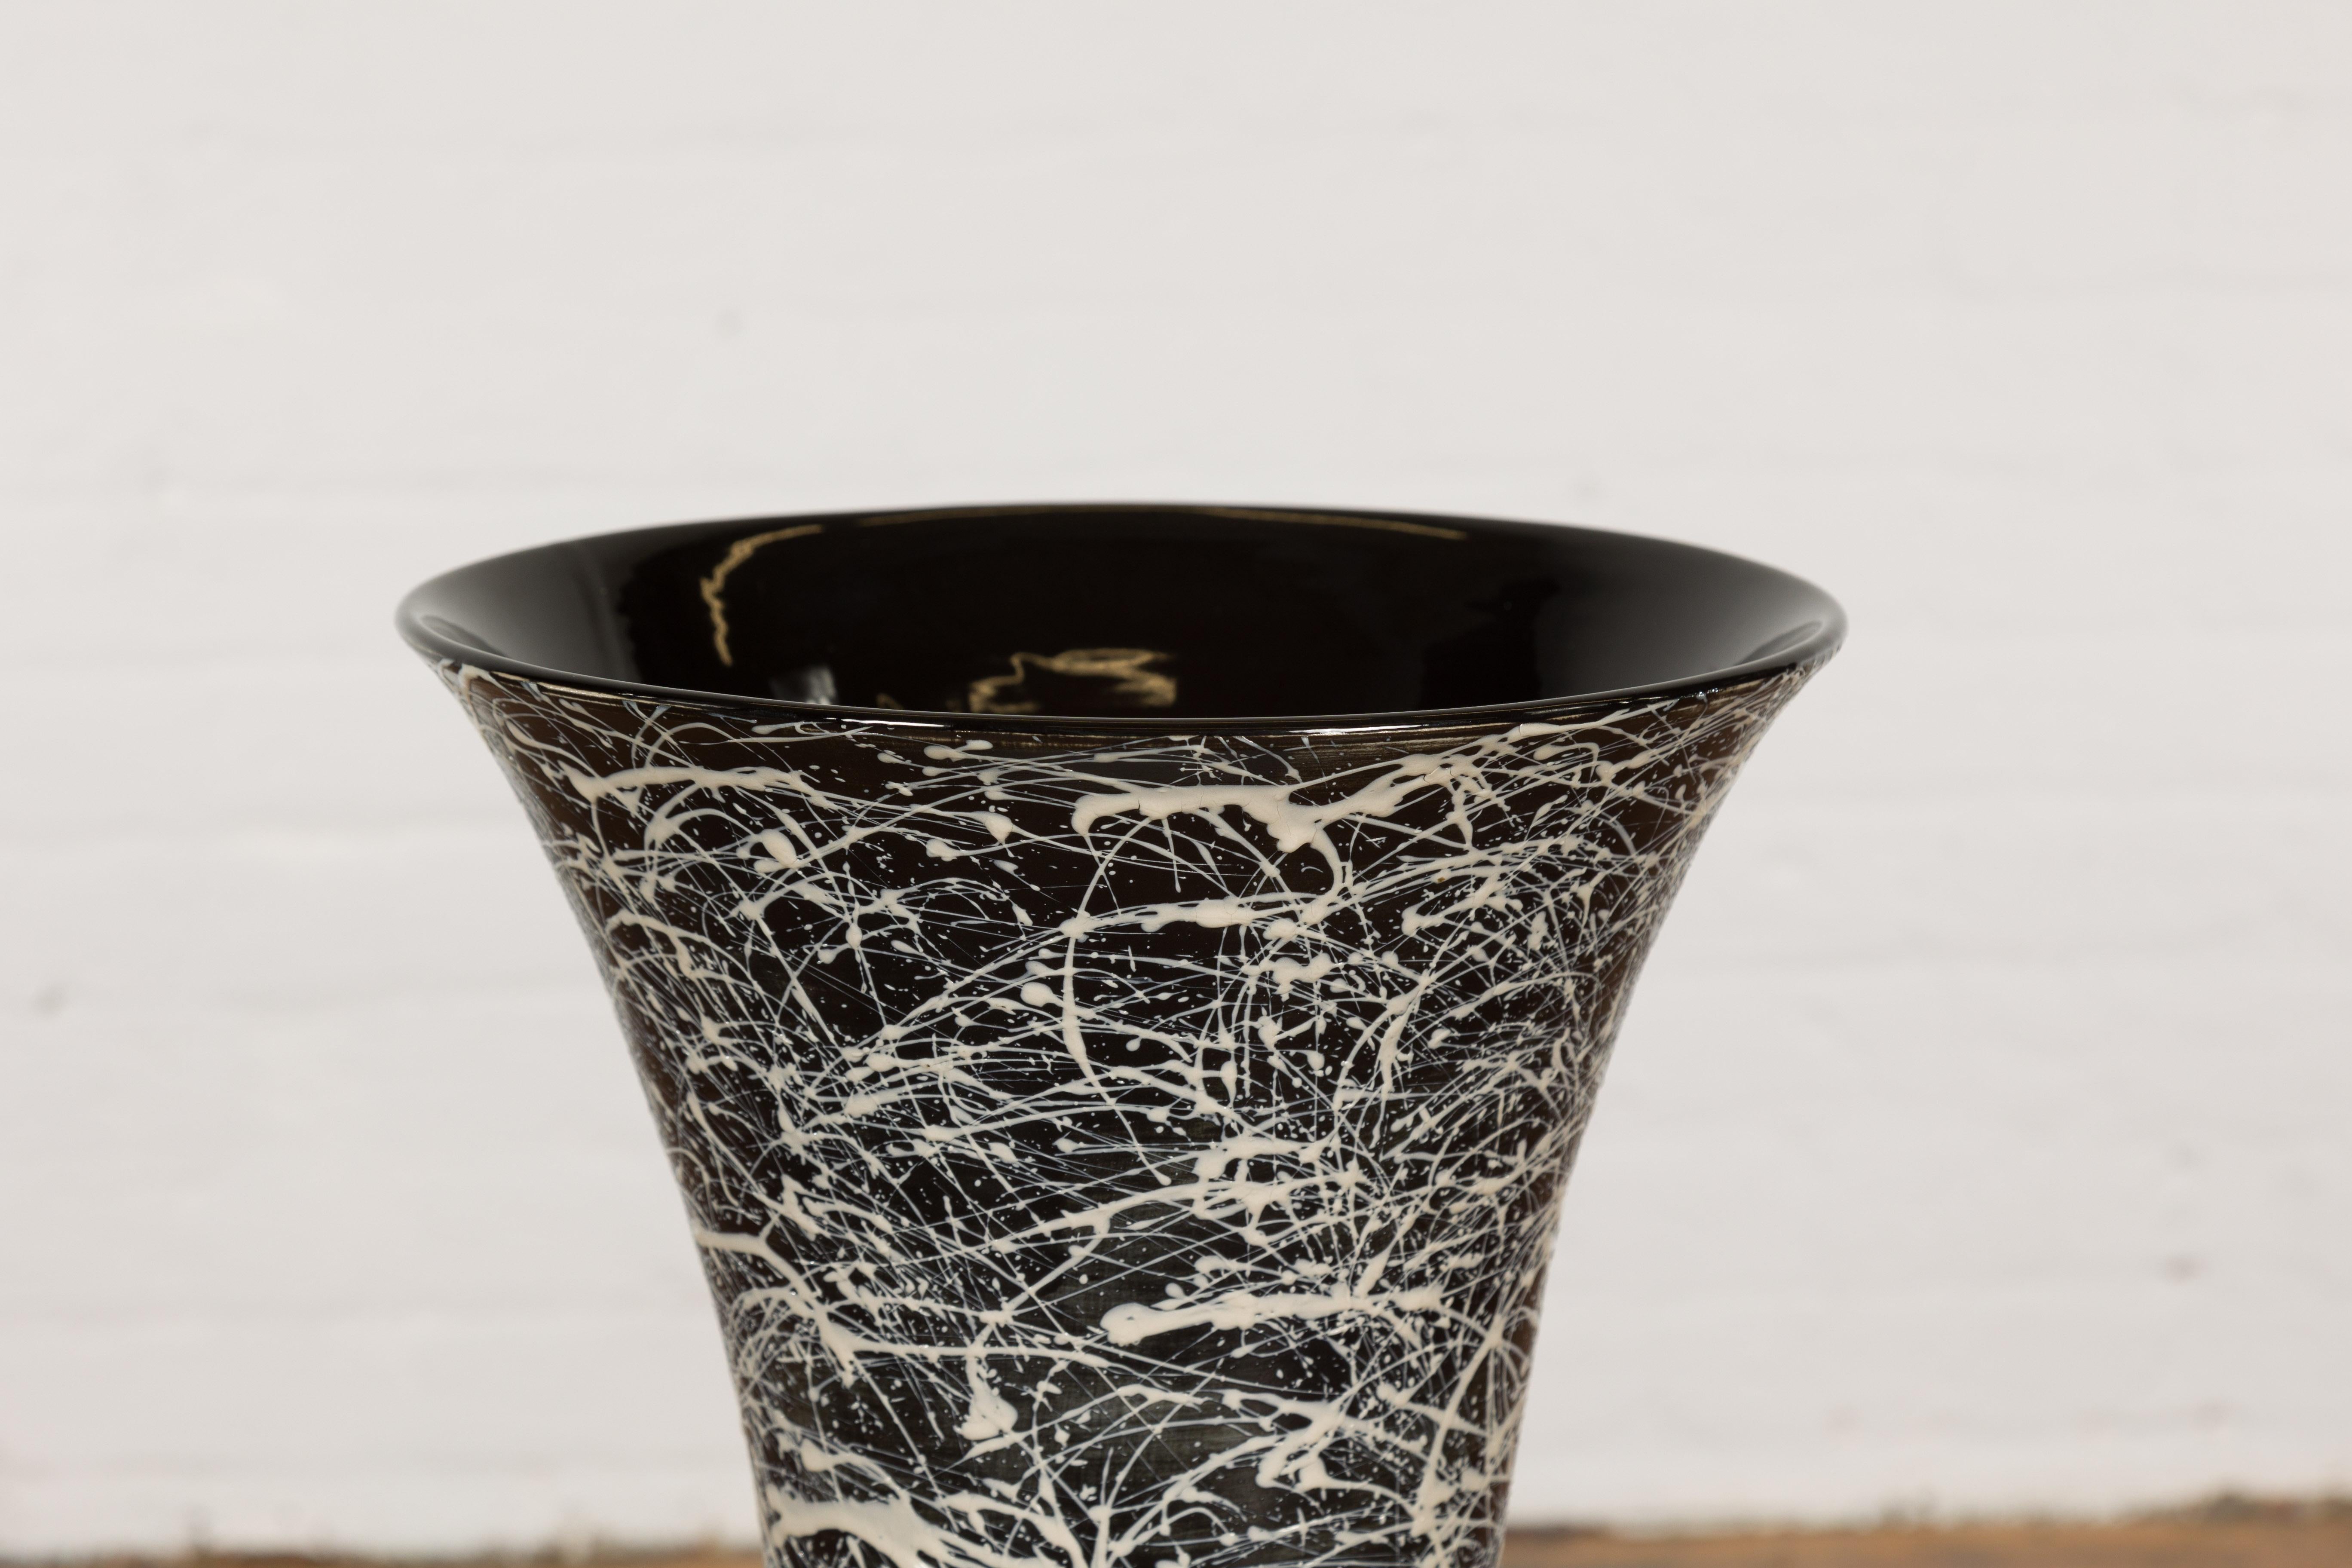 Trumpet Shaped Textured Black and White Splattered Ceramic Planter In Excellent Condition For Sale In Yonkers, NY